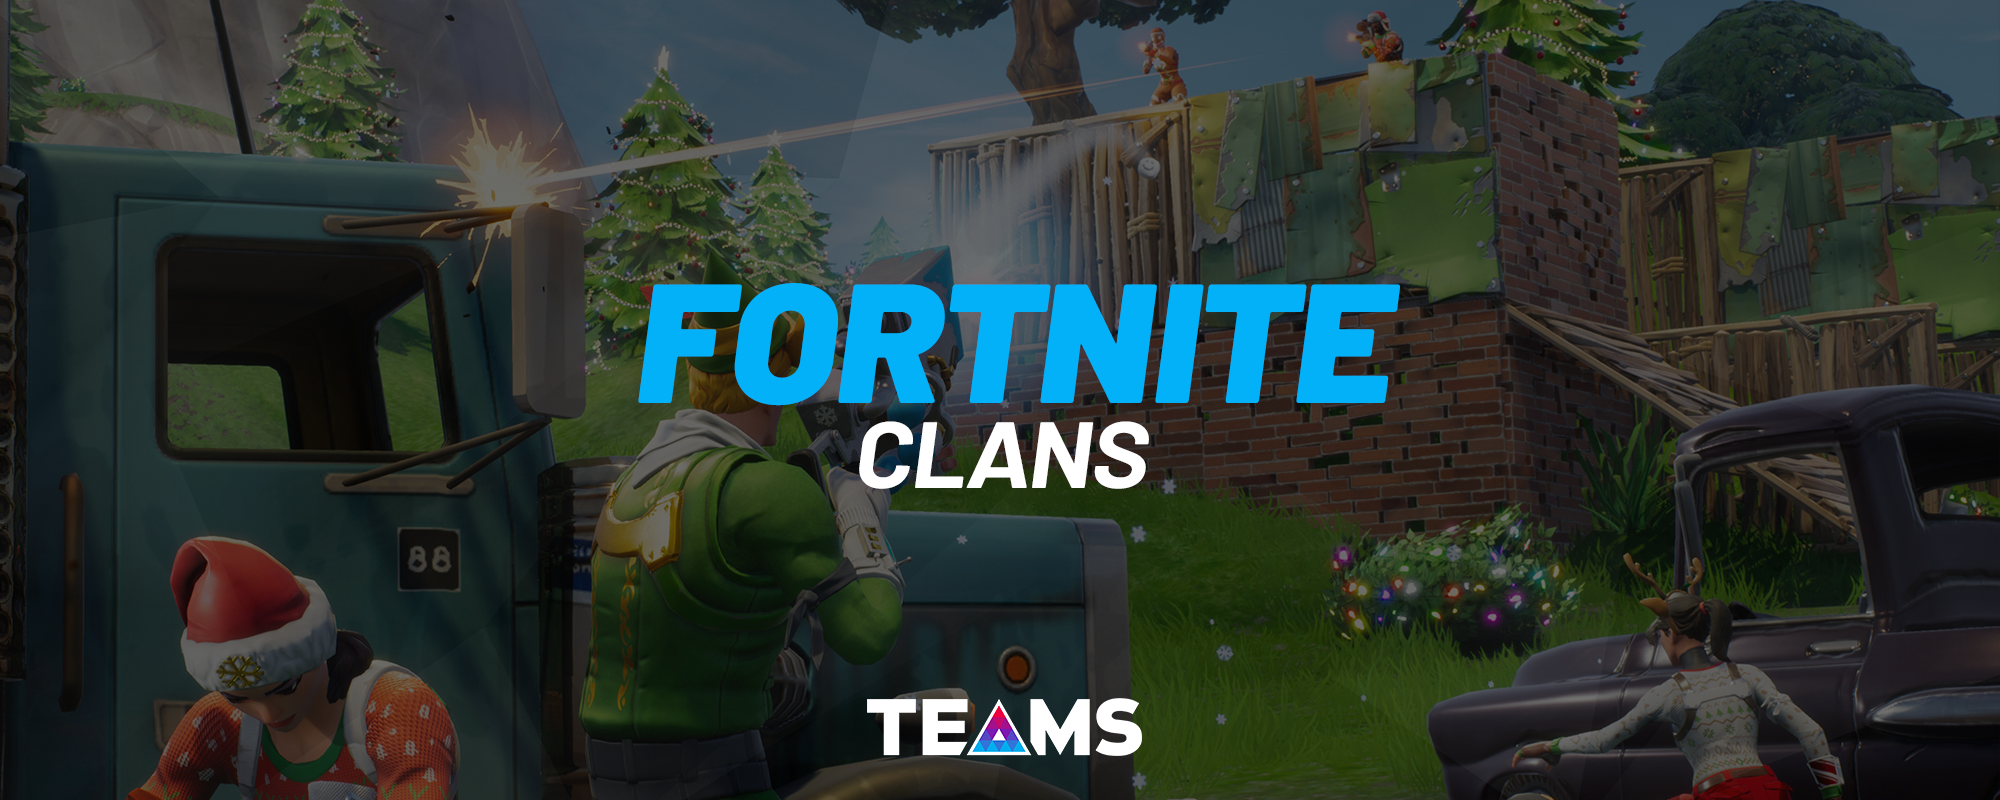 What Is A Fortnite Clan and How Do I Join One?